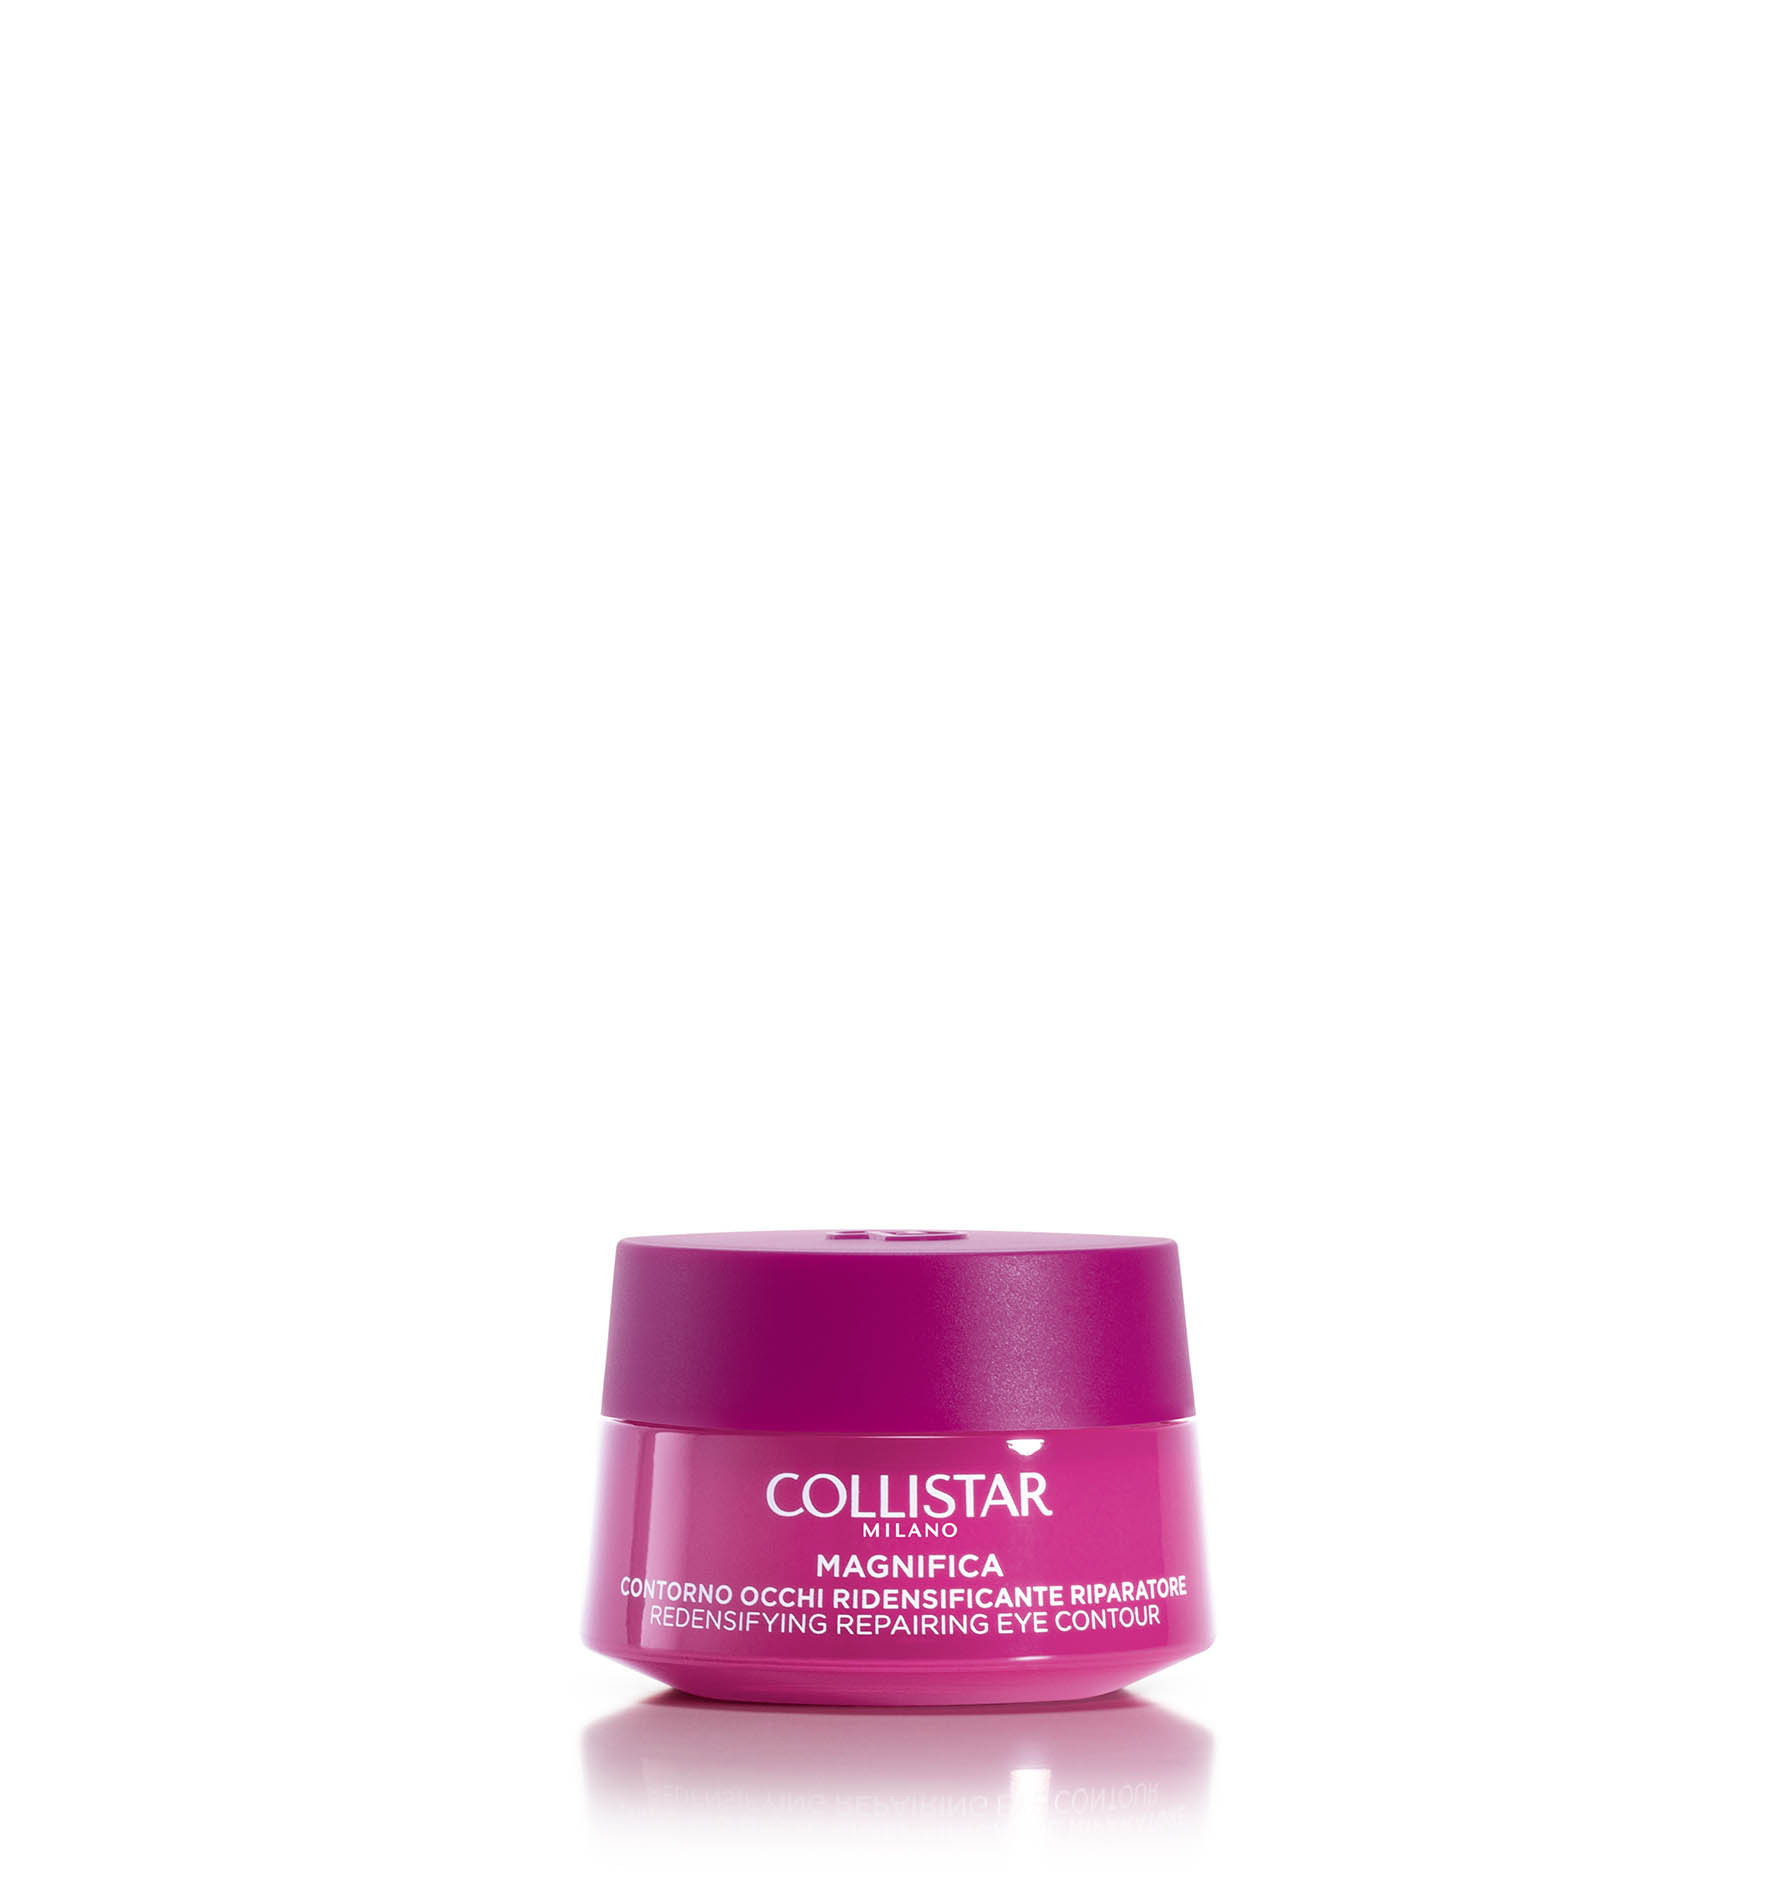 MAGNIFICA REDENSIFYING REPAIRING EYE CONTOUR - Magnifica | Collistar - Shop Online Ufficiale